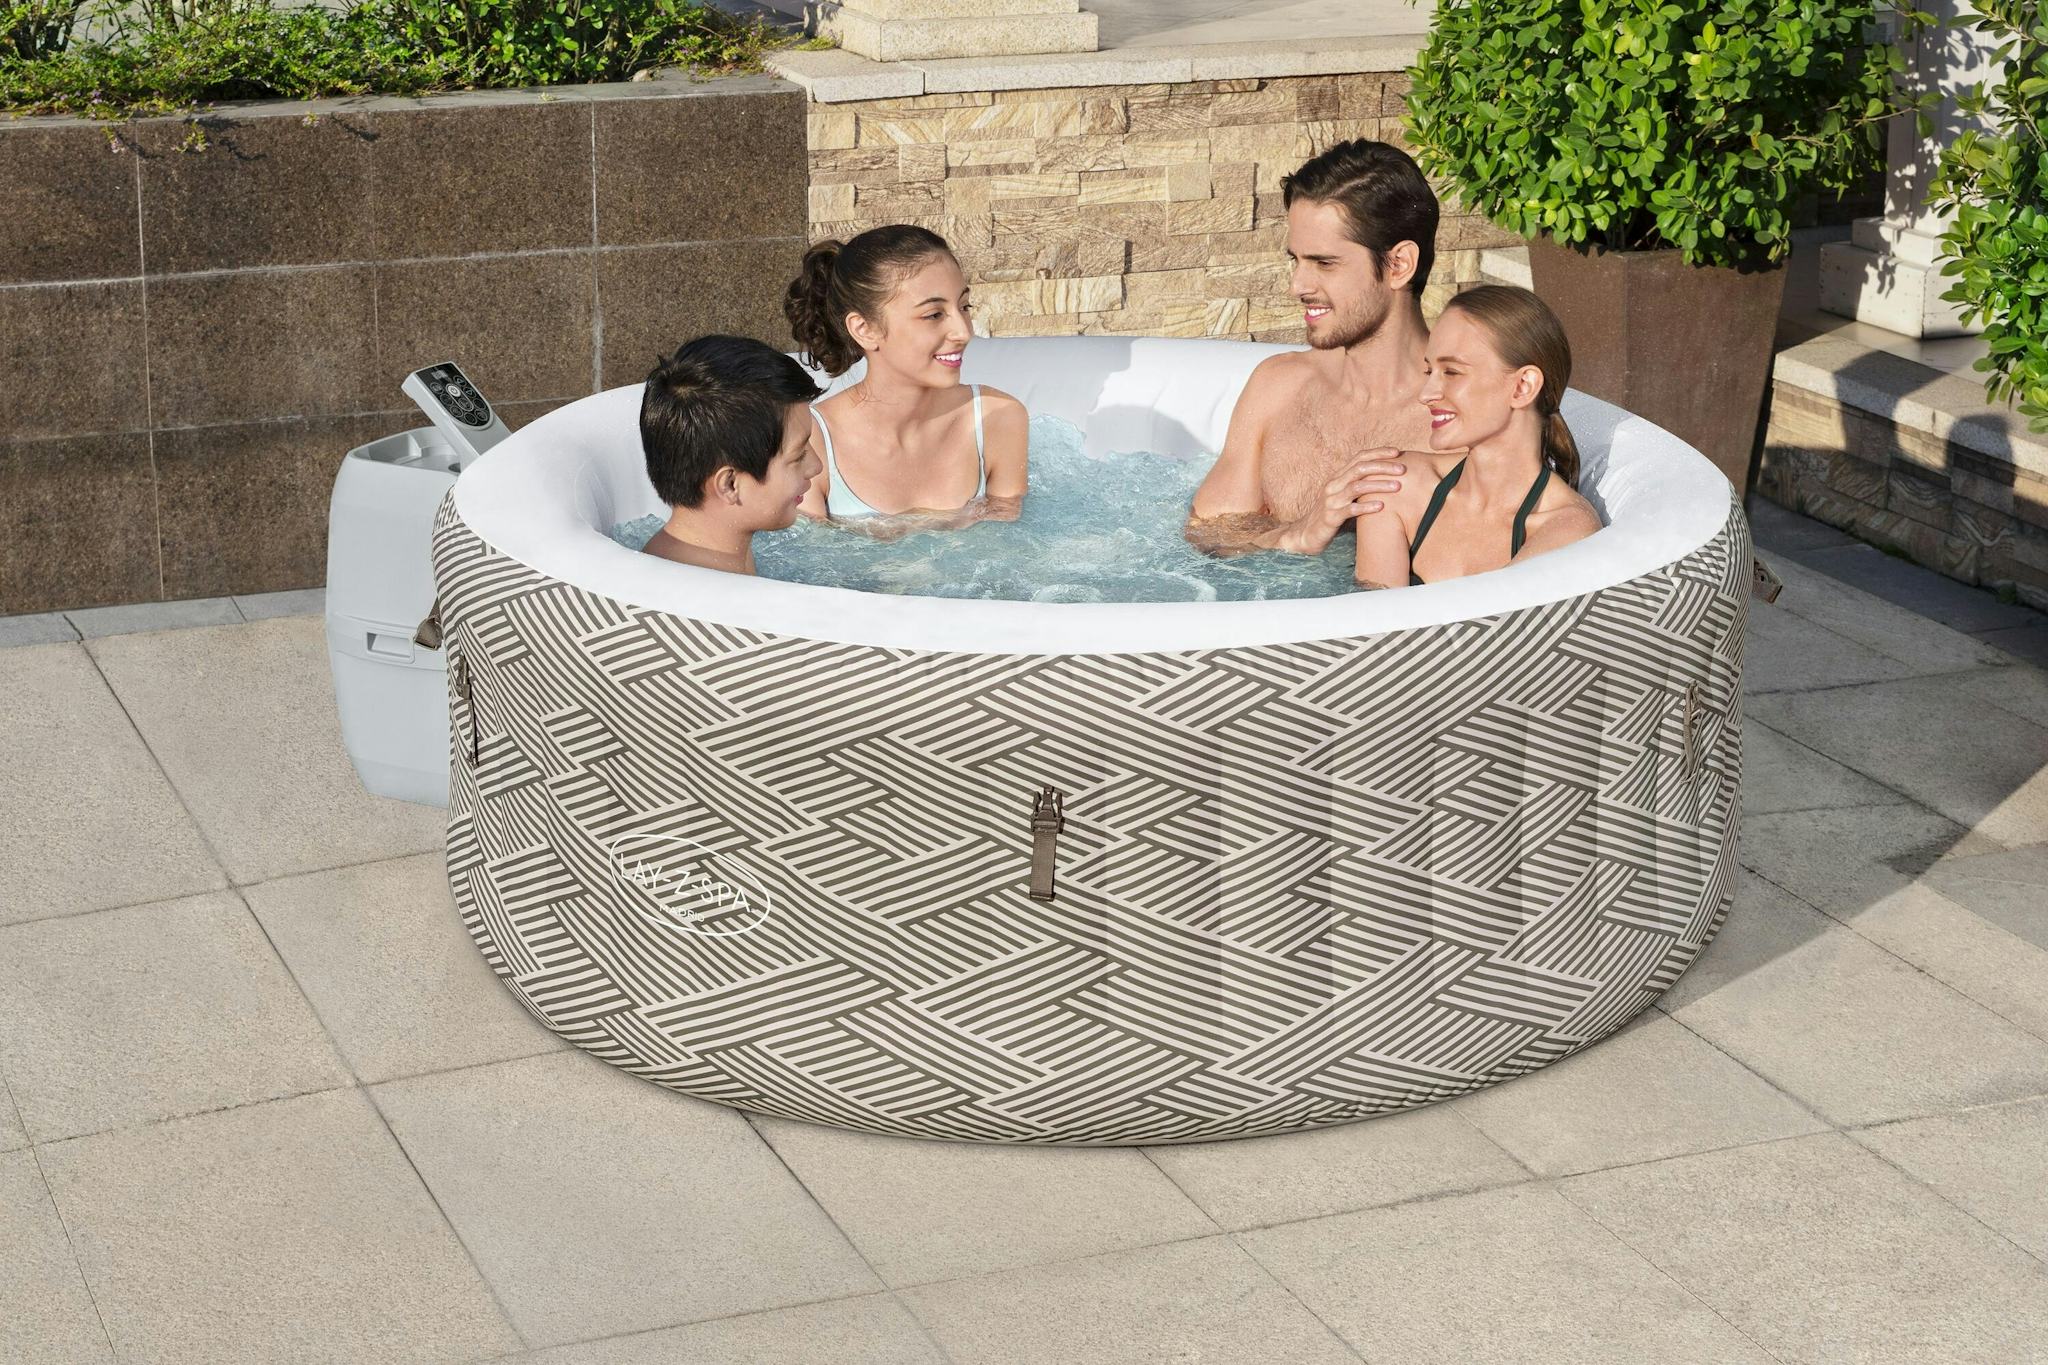 Spas Gonflables Spa gonflable rond Lay-Z-Spa Madrid Airjet™ 2 - 4 personnes Bestway 3